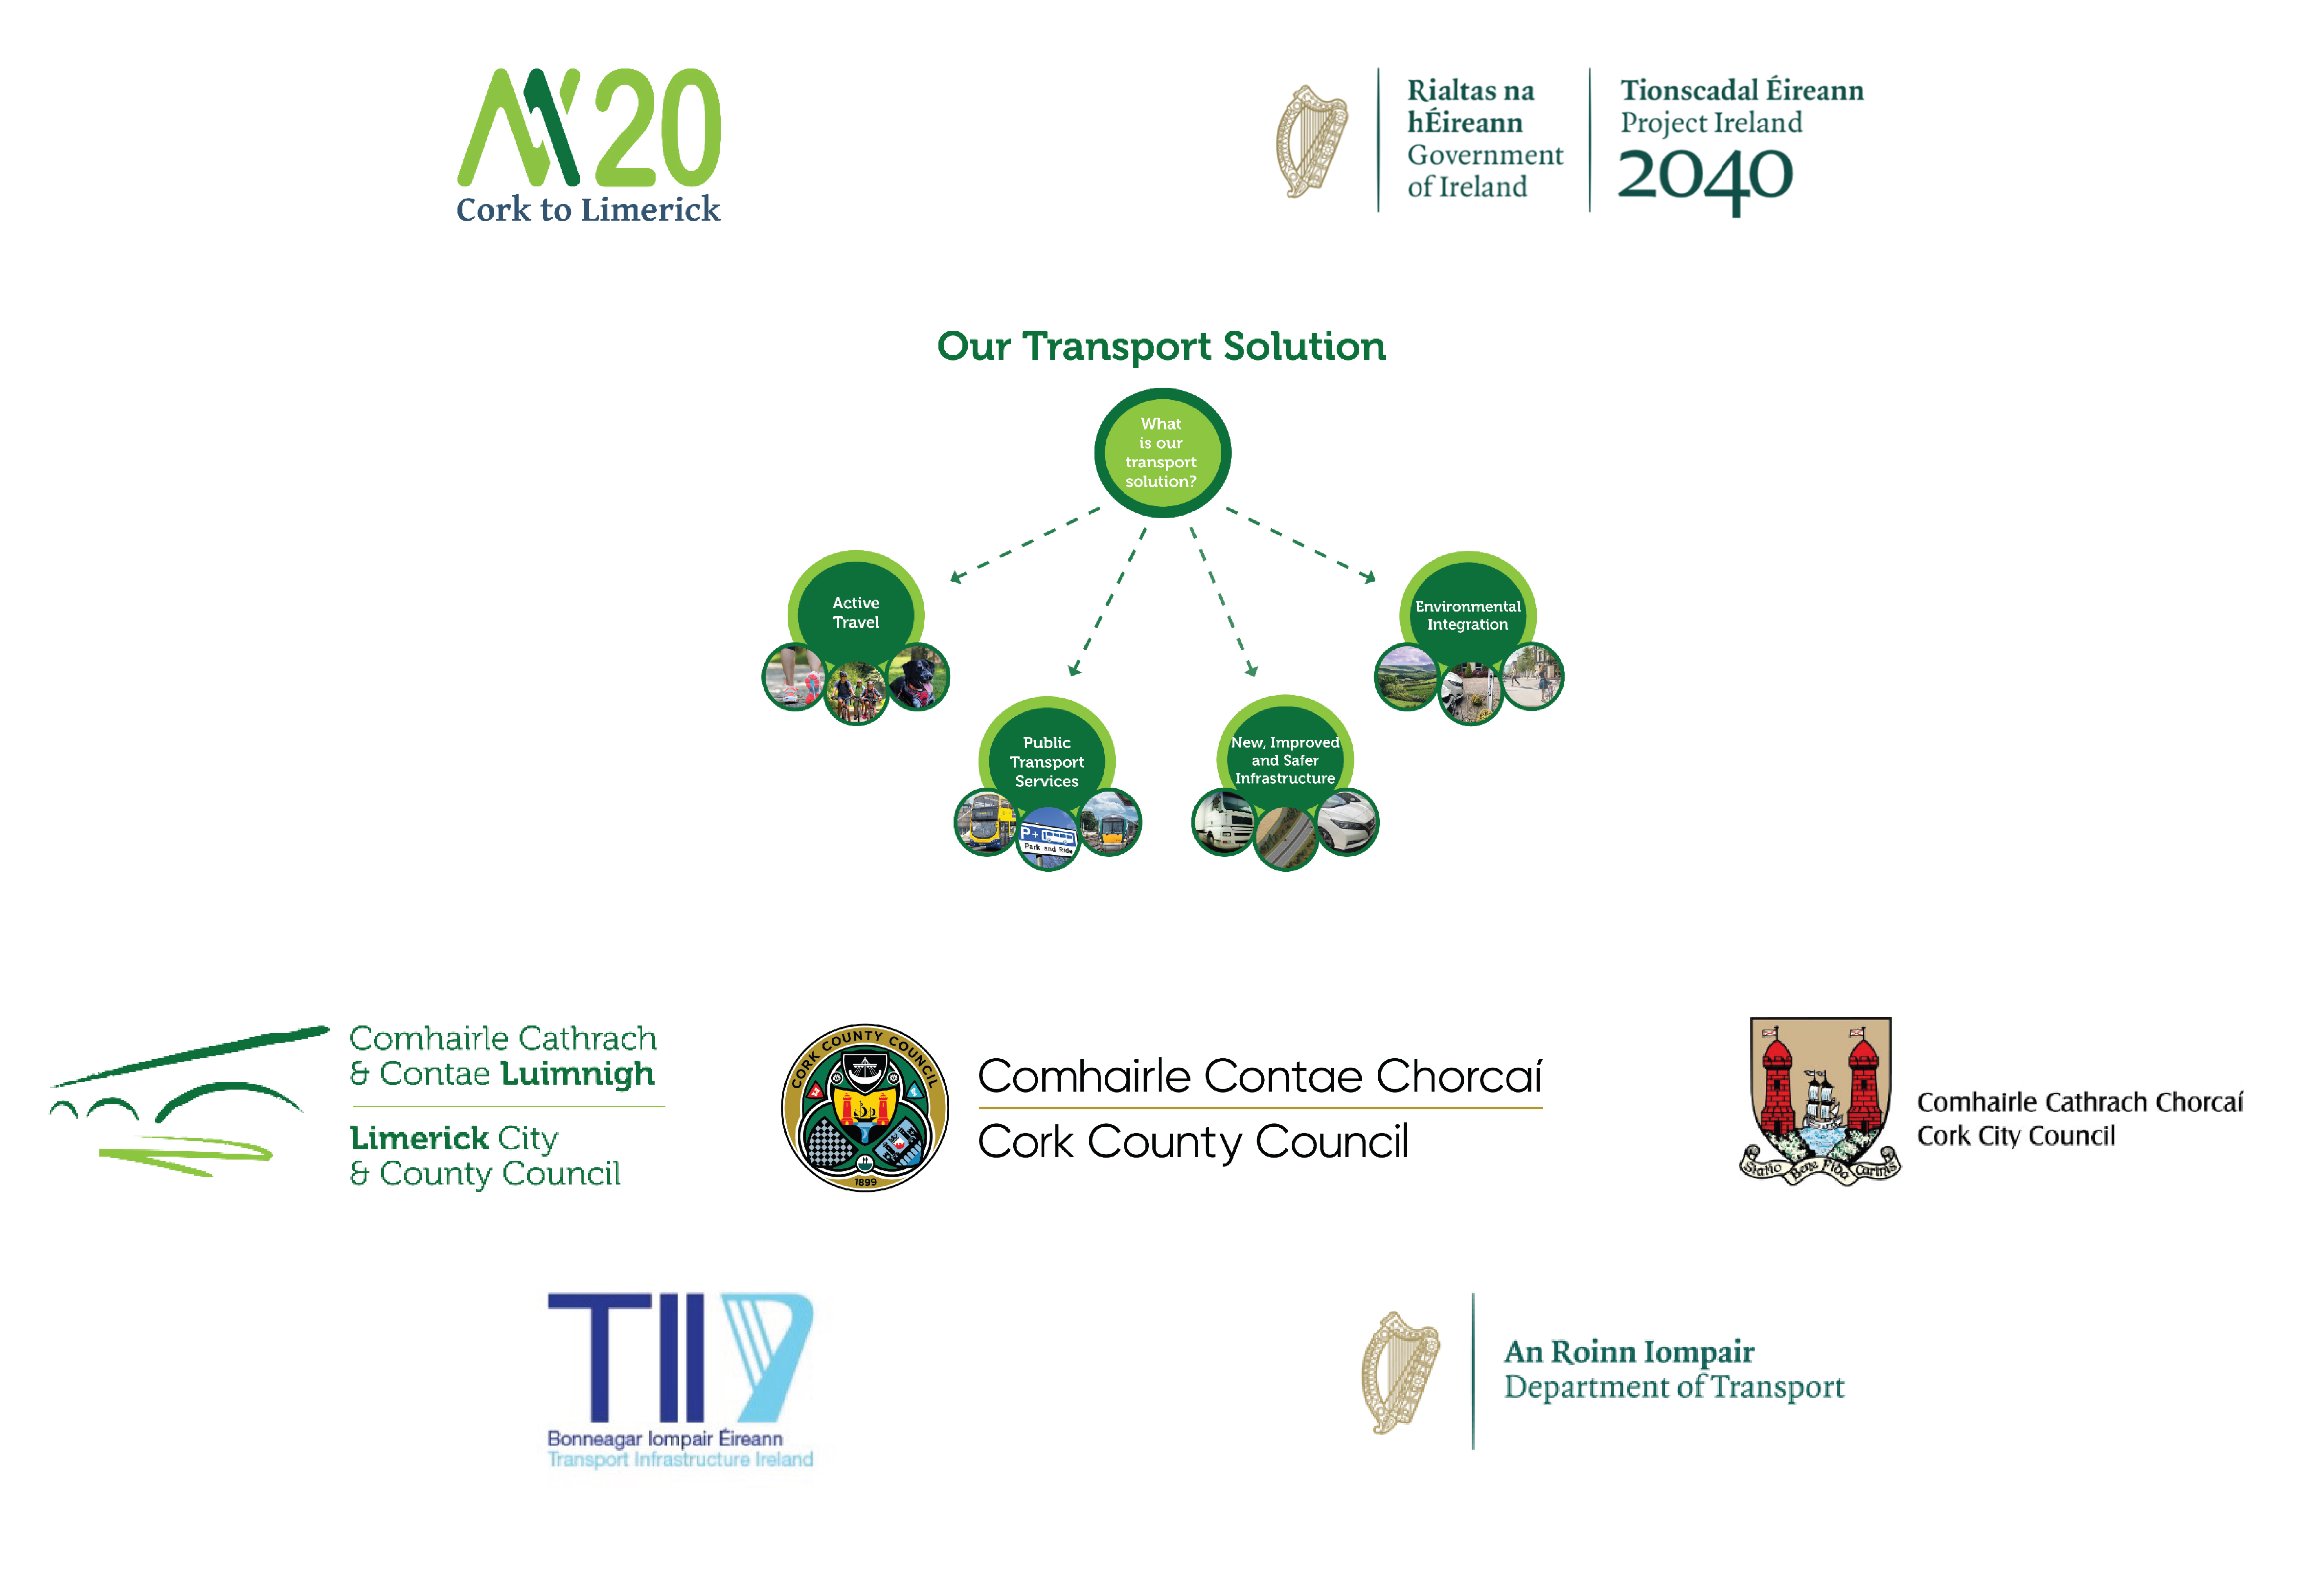 nm20-cork-to-limerick-project-logos 2